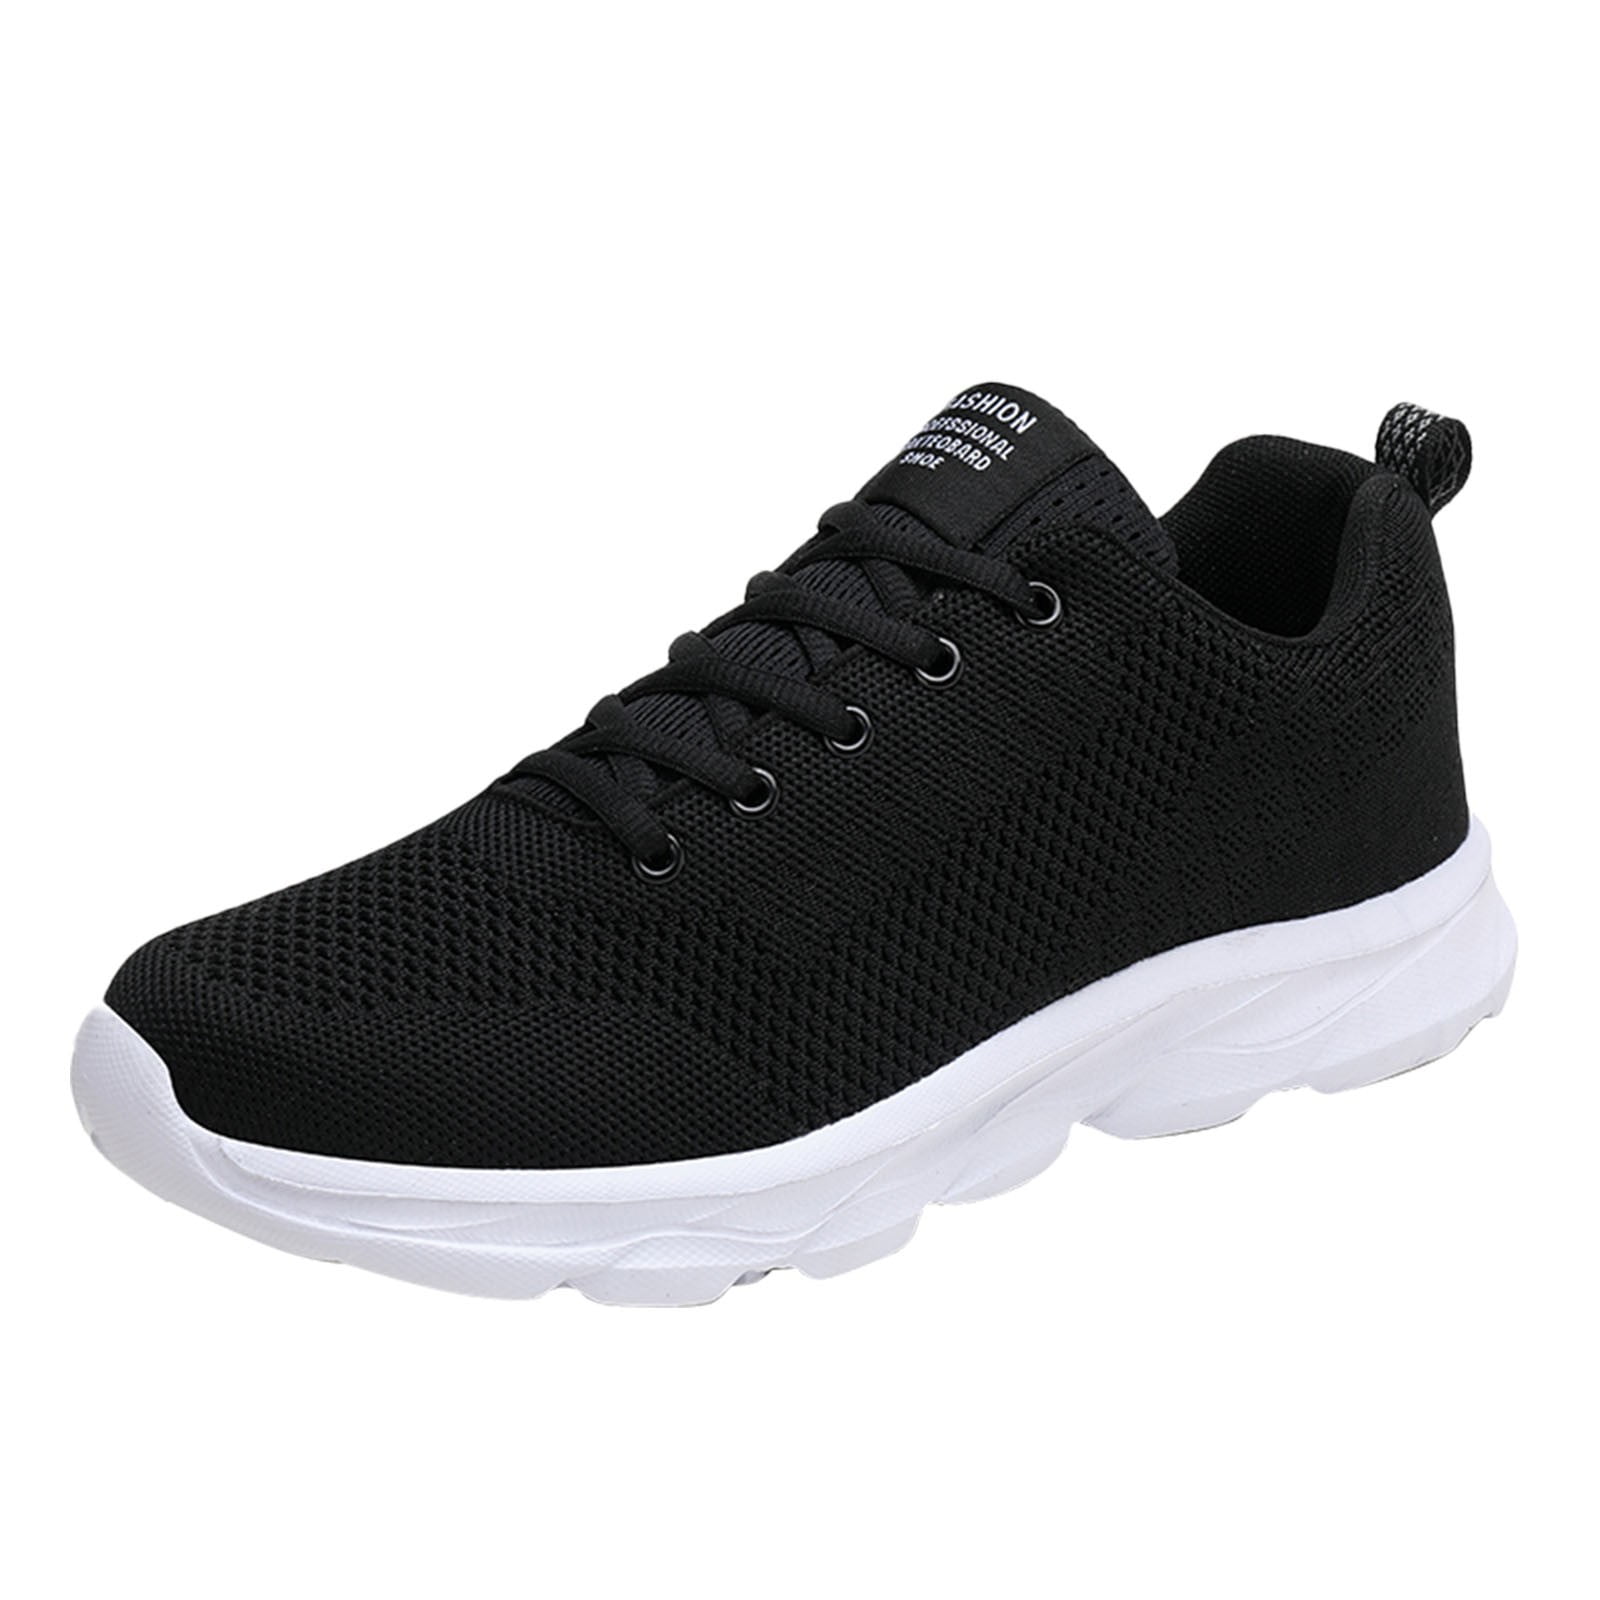 Fashion Men's Lightweight Comfortable Breathable Sports Lace-up Running ...